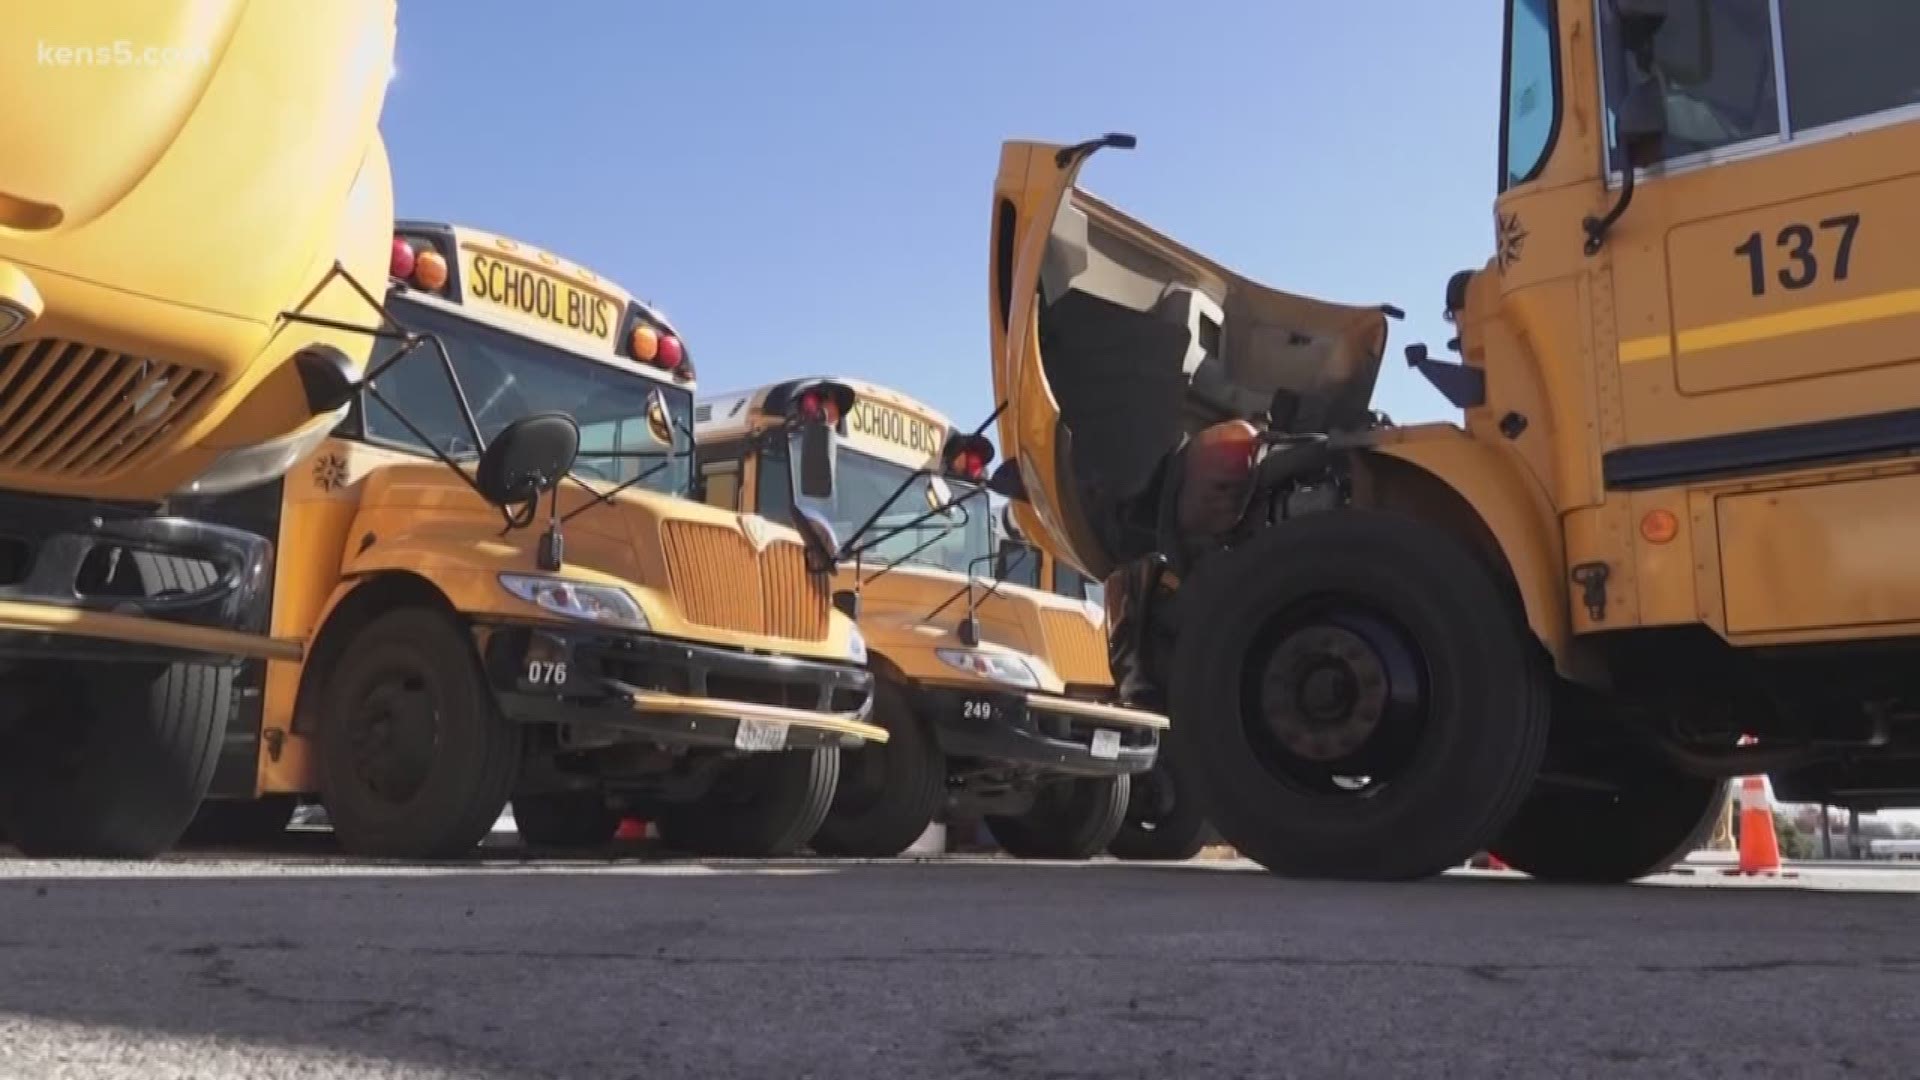 According to the district, a vendor accidentally put diesel and regular fuels in the wrong supply compartments - leading to the misfueling of 29 school buses.